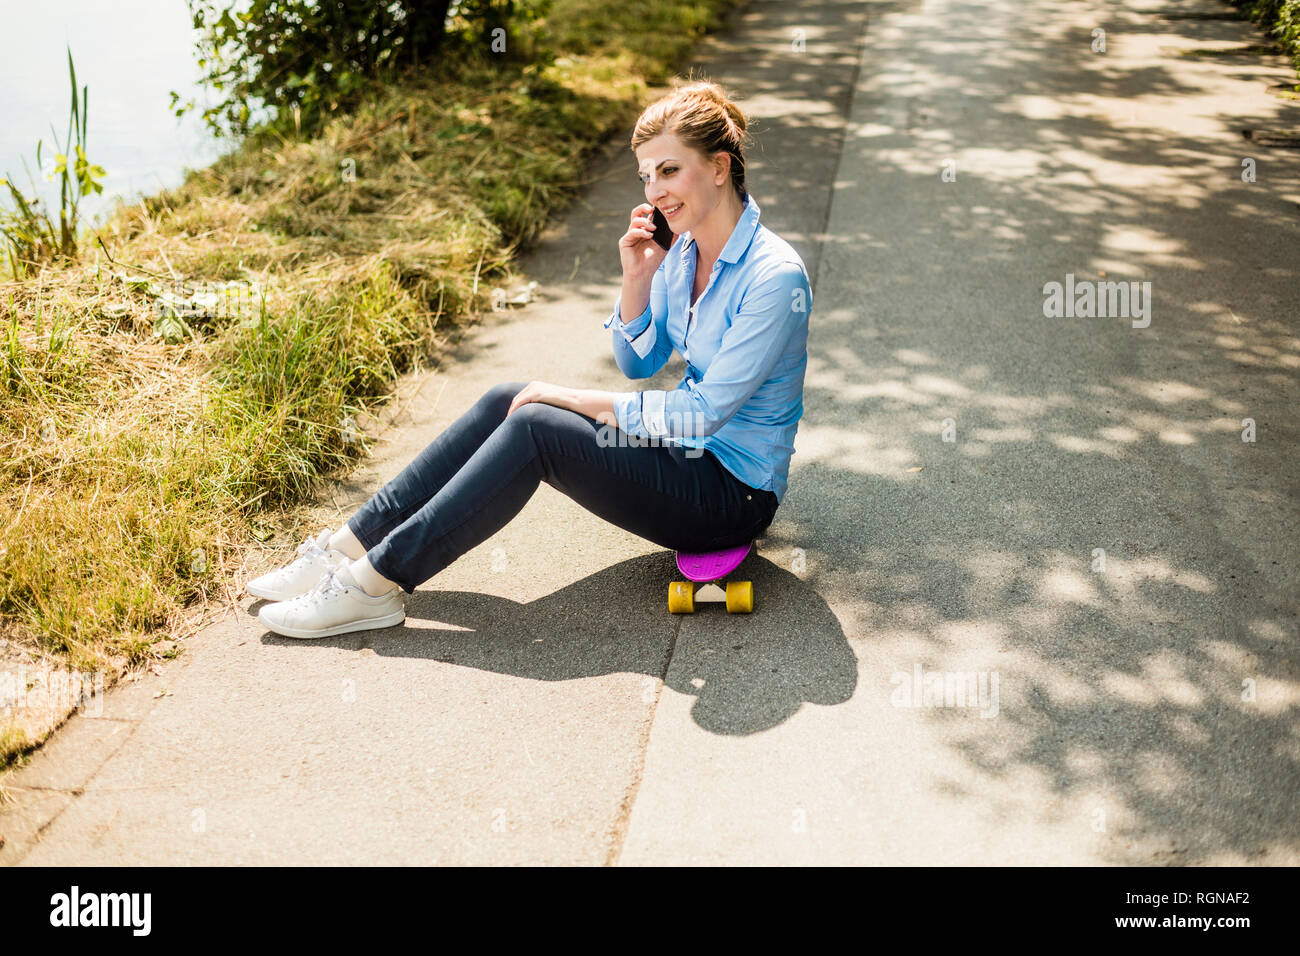 Smiling woman sitting on penny board talking on cell phone Stock Photo